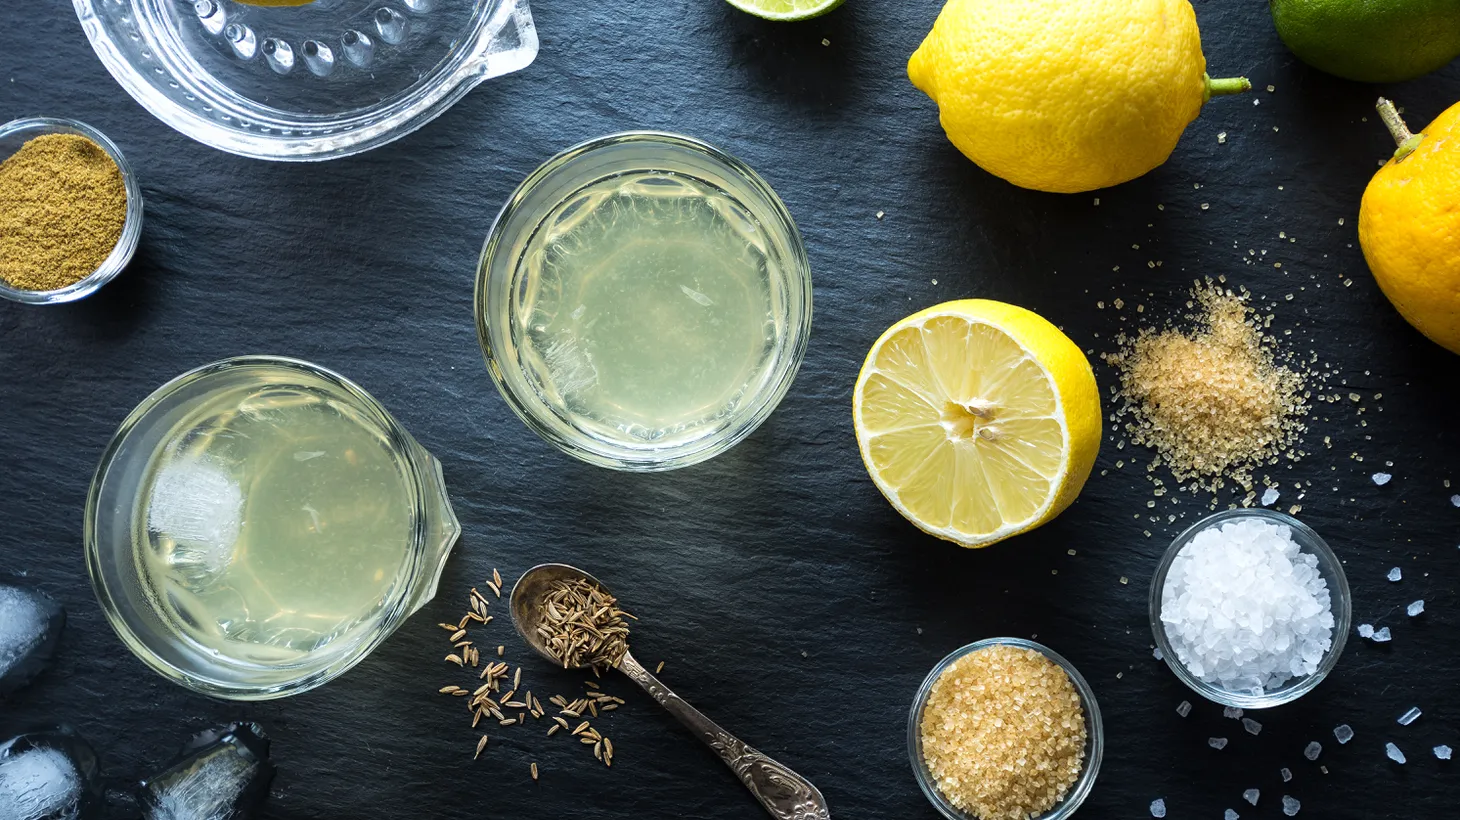 Relief from India’s scorching heat can often be found in a glass of spiced limeade called Nimbu pani.